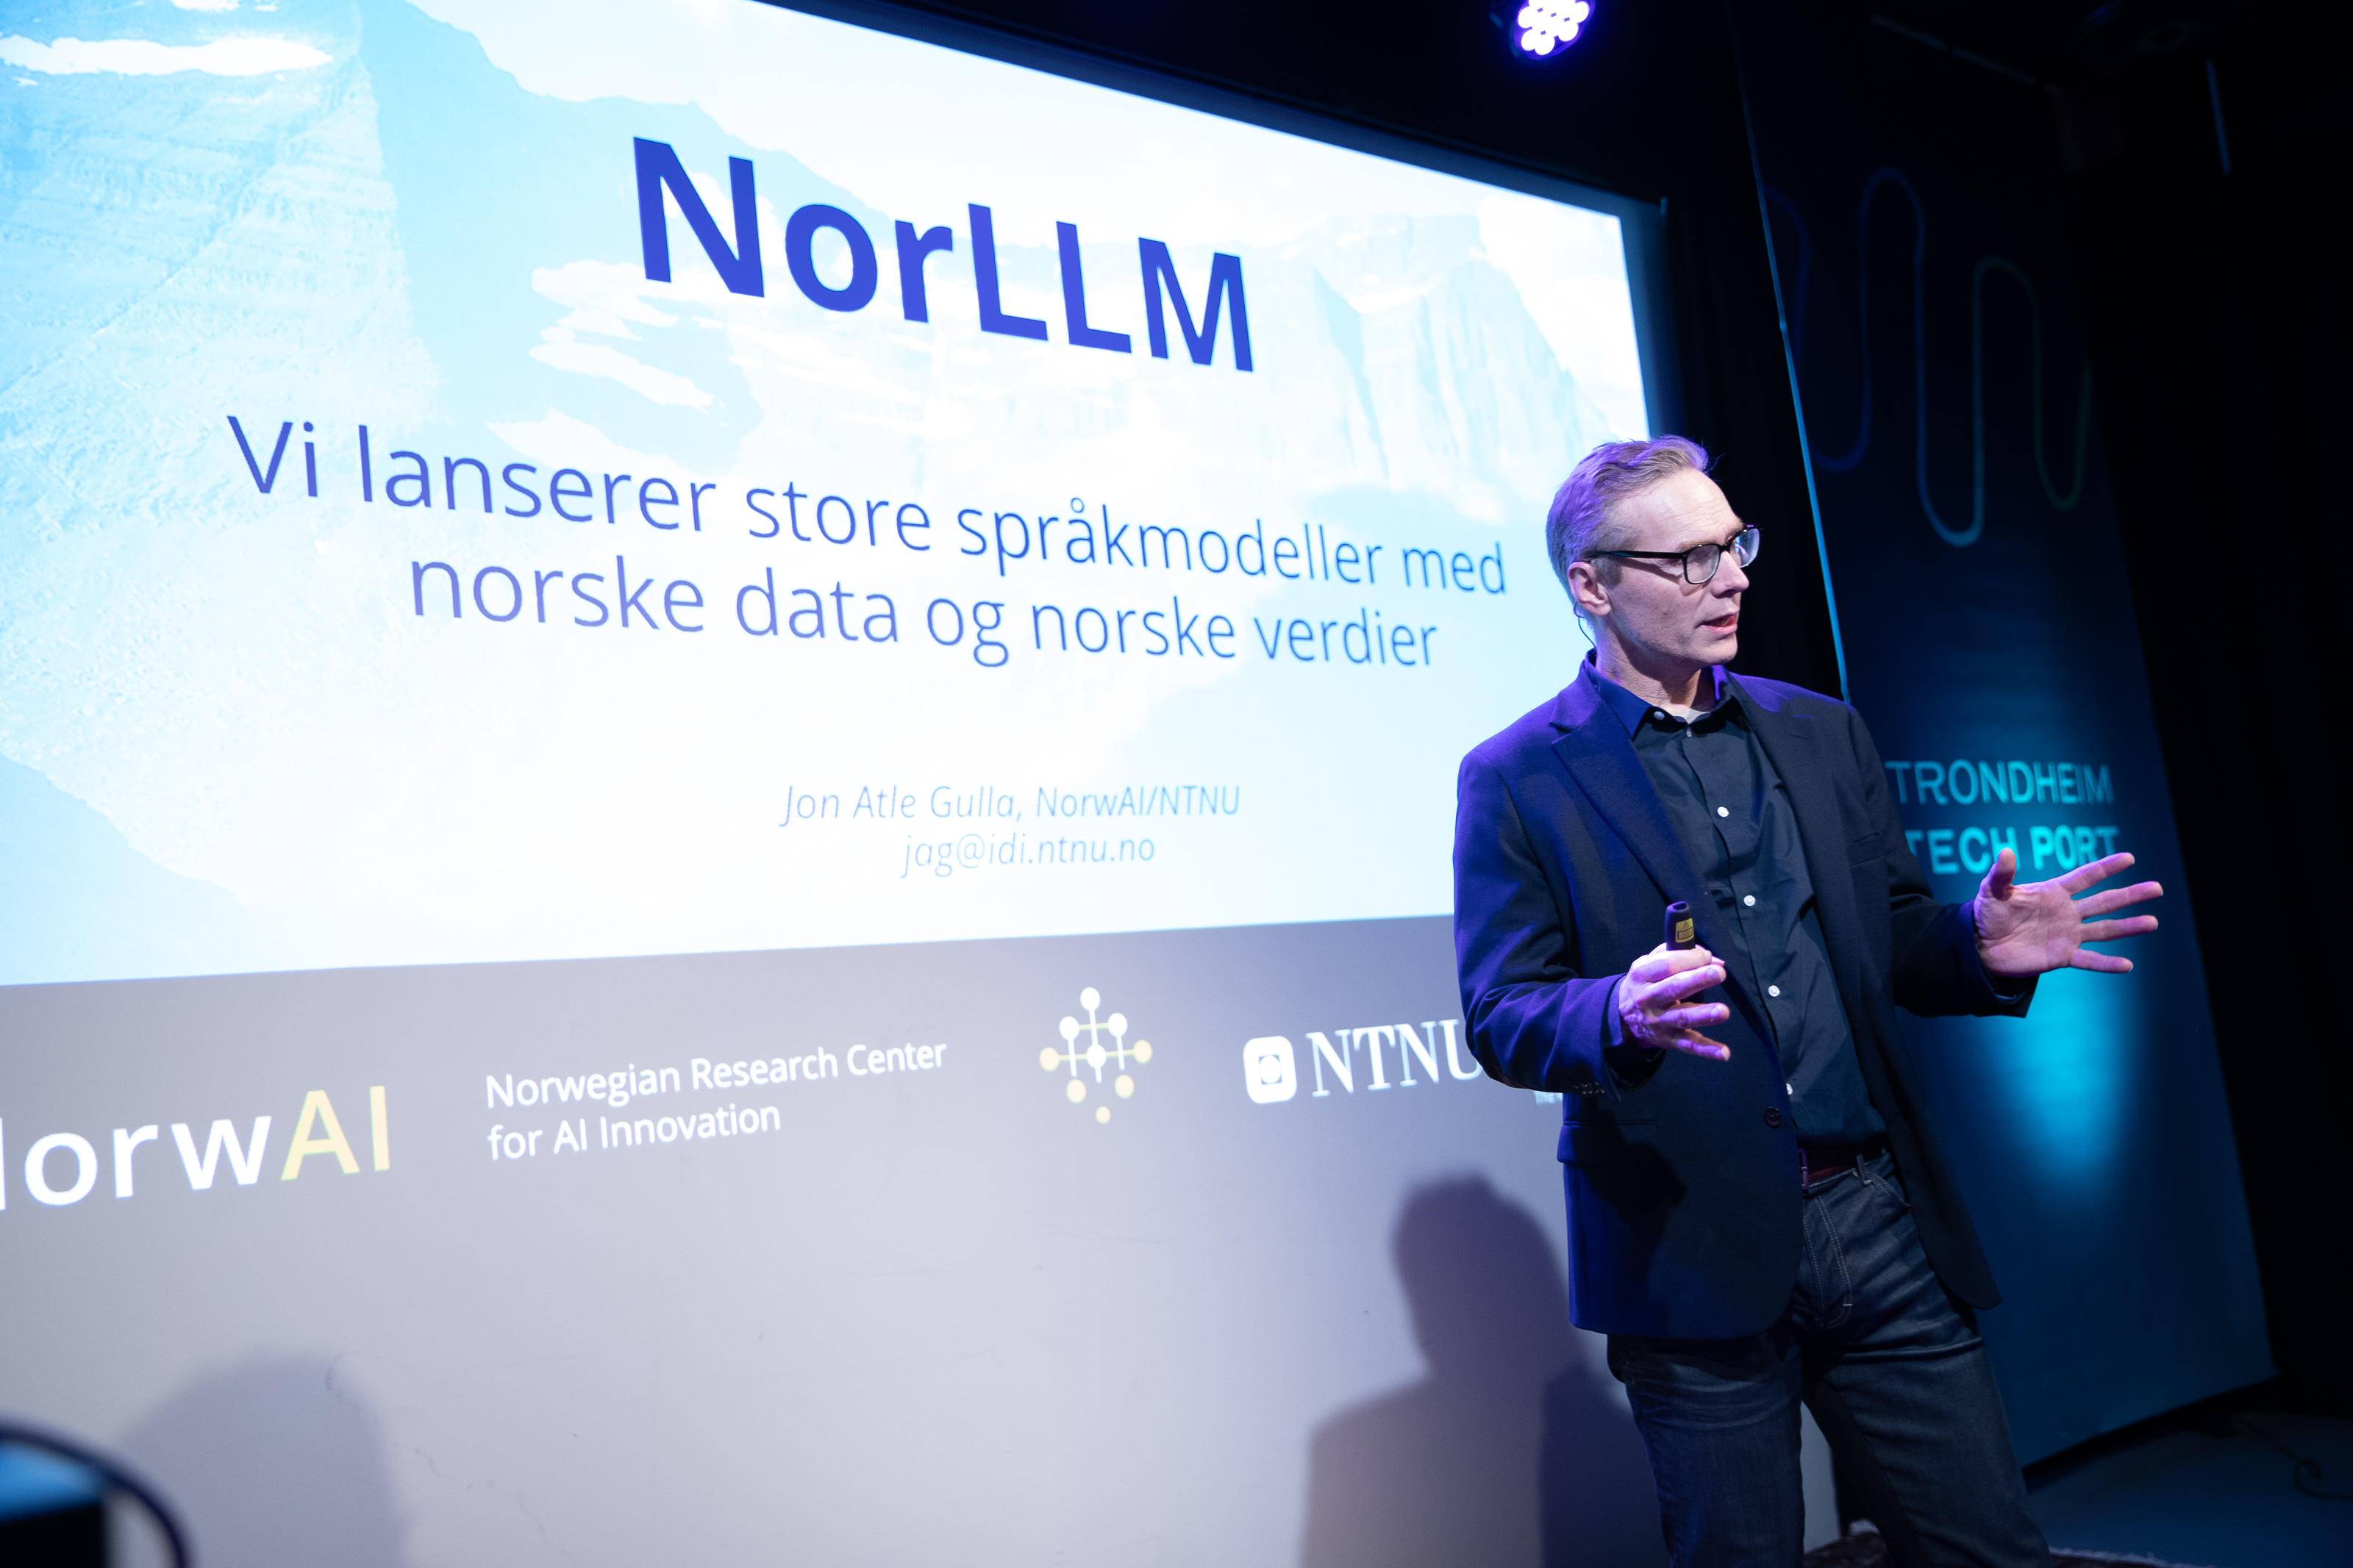 A presentation of the NorLLM project, which focuses on large language models based on Norwegian data and values, at a conference in Trondheim. The screen displays information about the model launch, along with the logos of NorwAI and NTNU